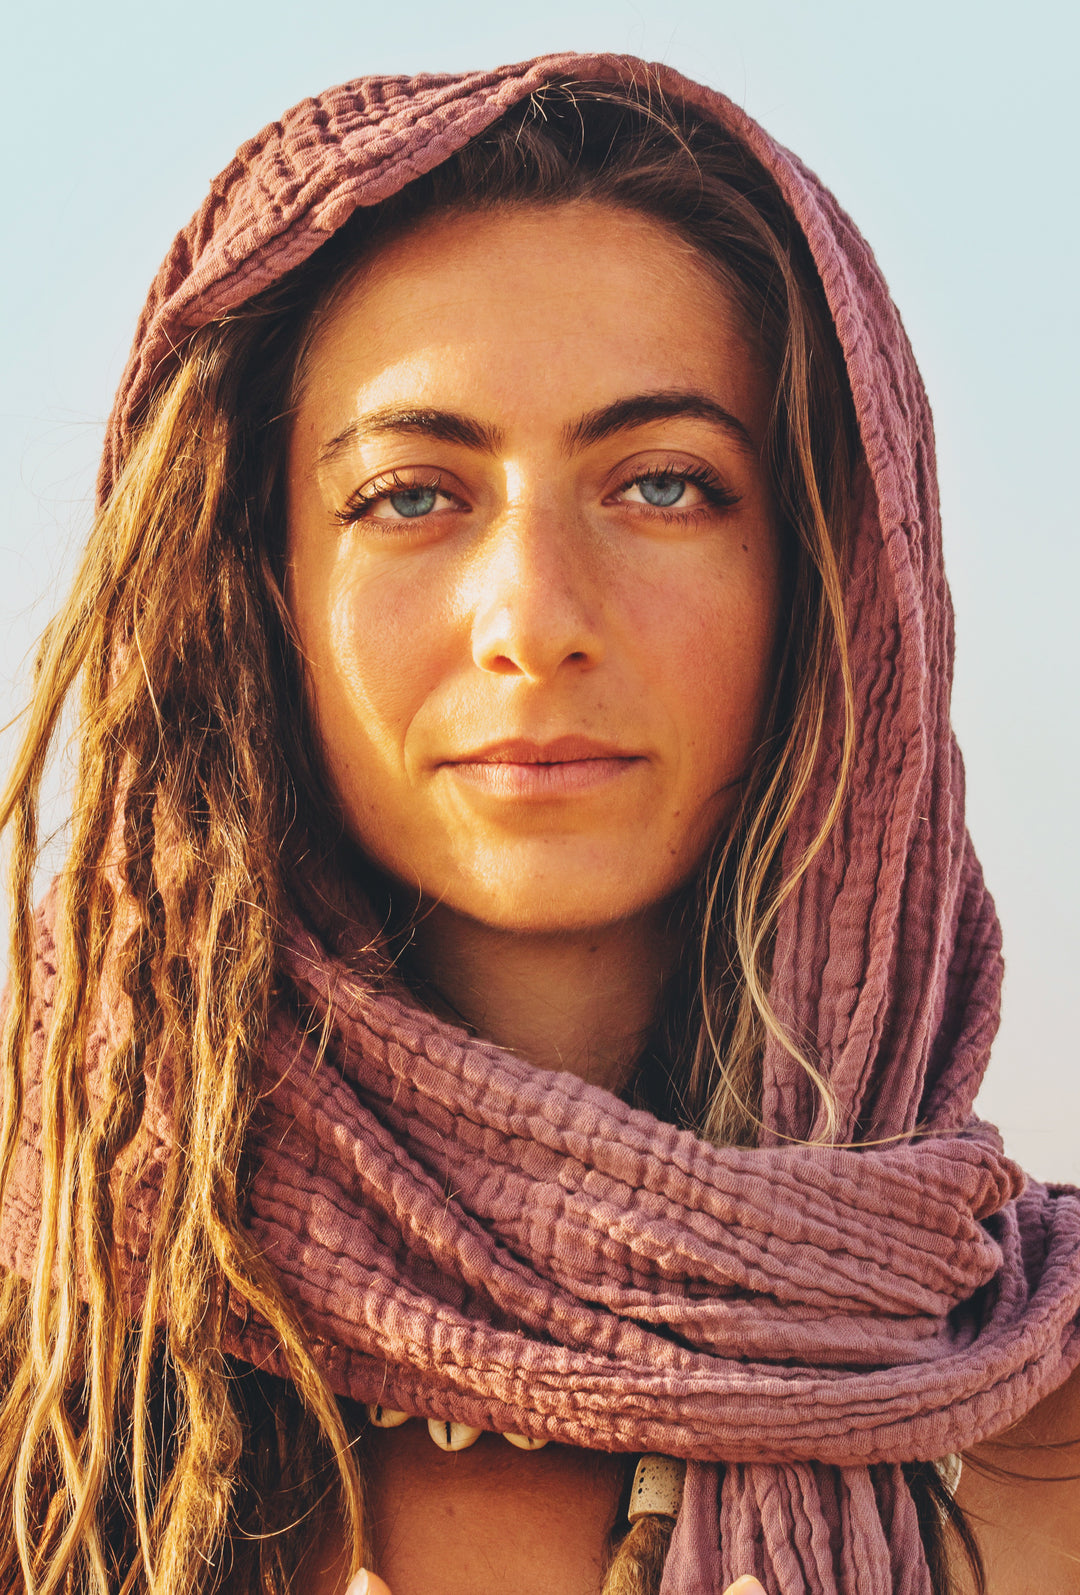 Model poses with earthen rose color gauze scarf around her head and neck.